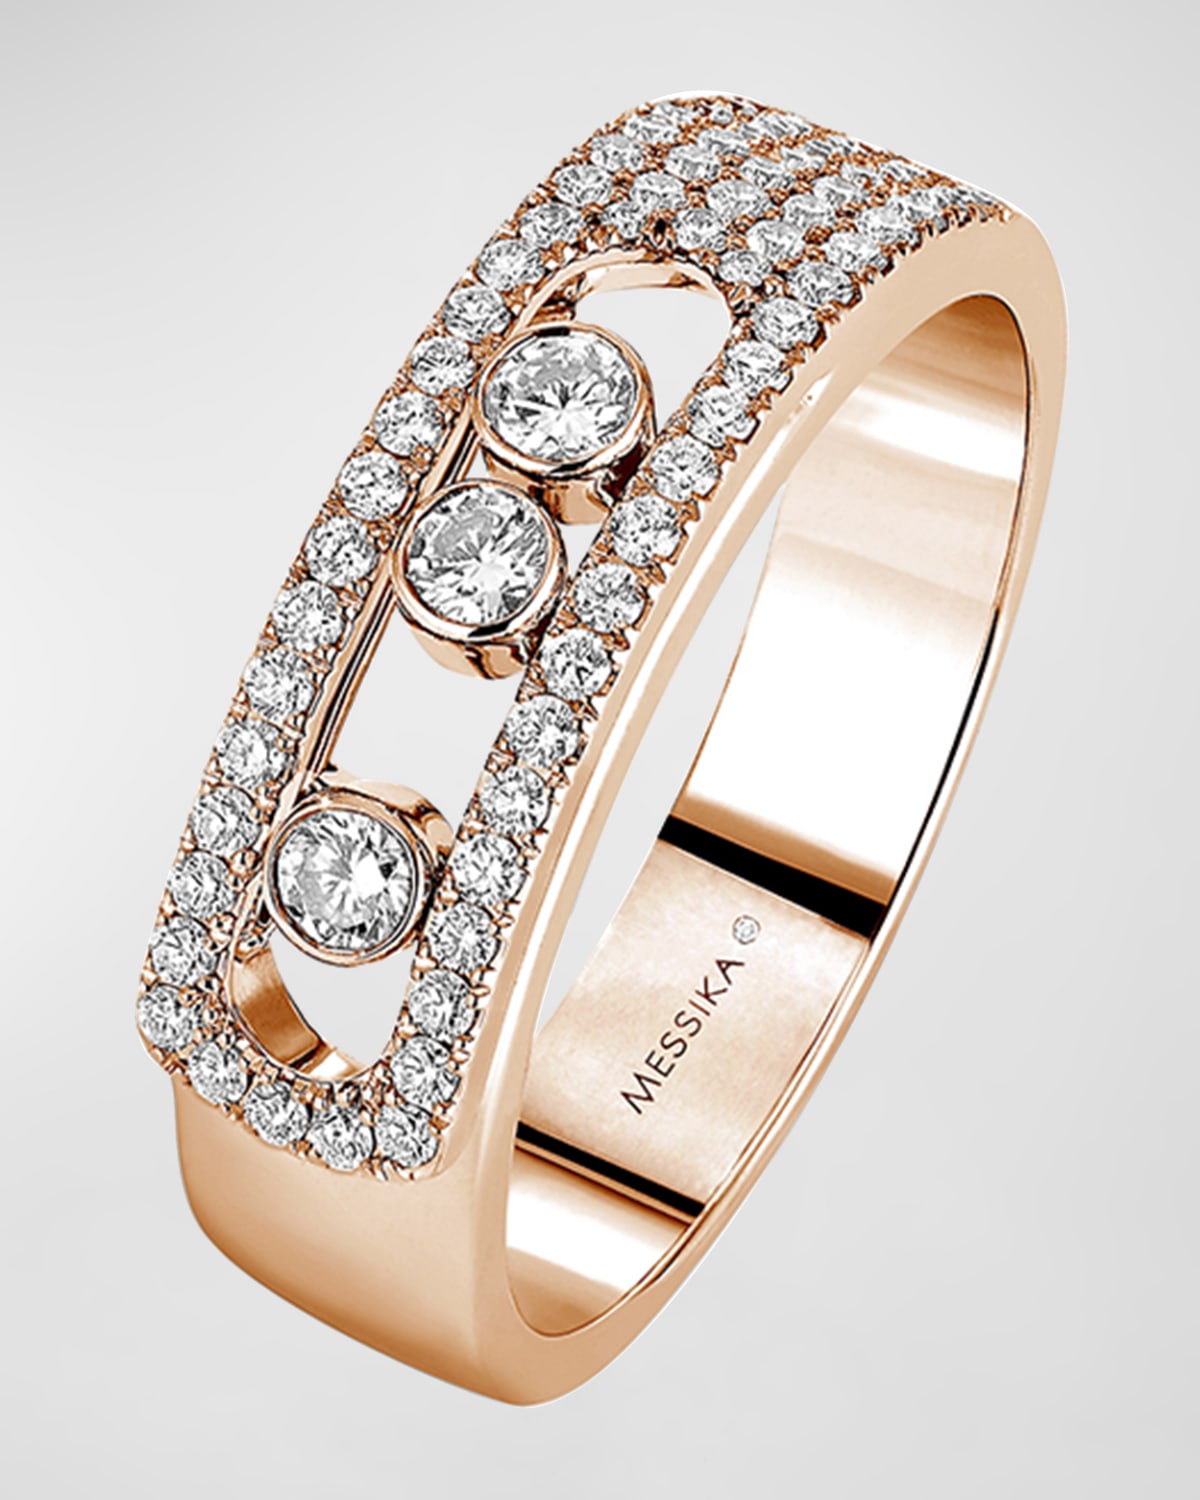 MESSIKA MOVE NOA PAVE PINK GOLD RING